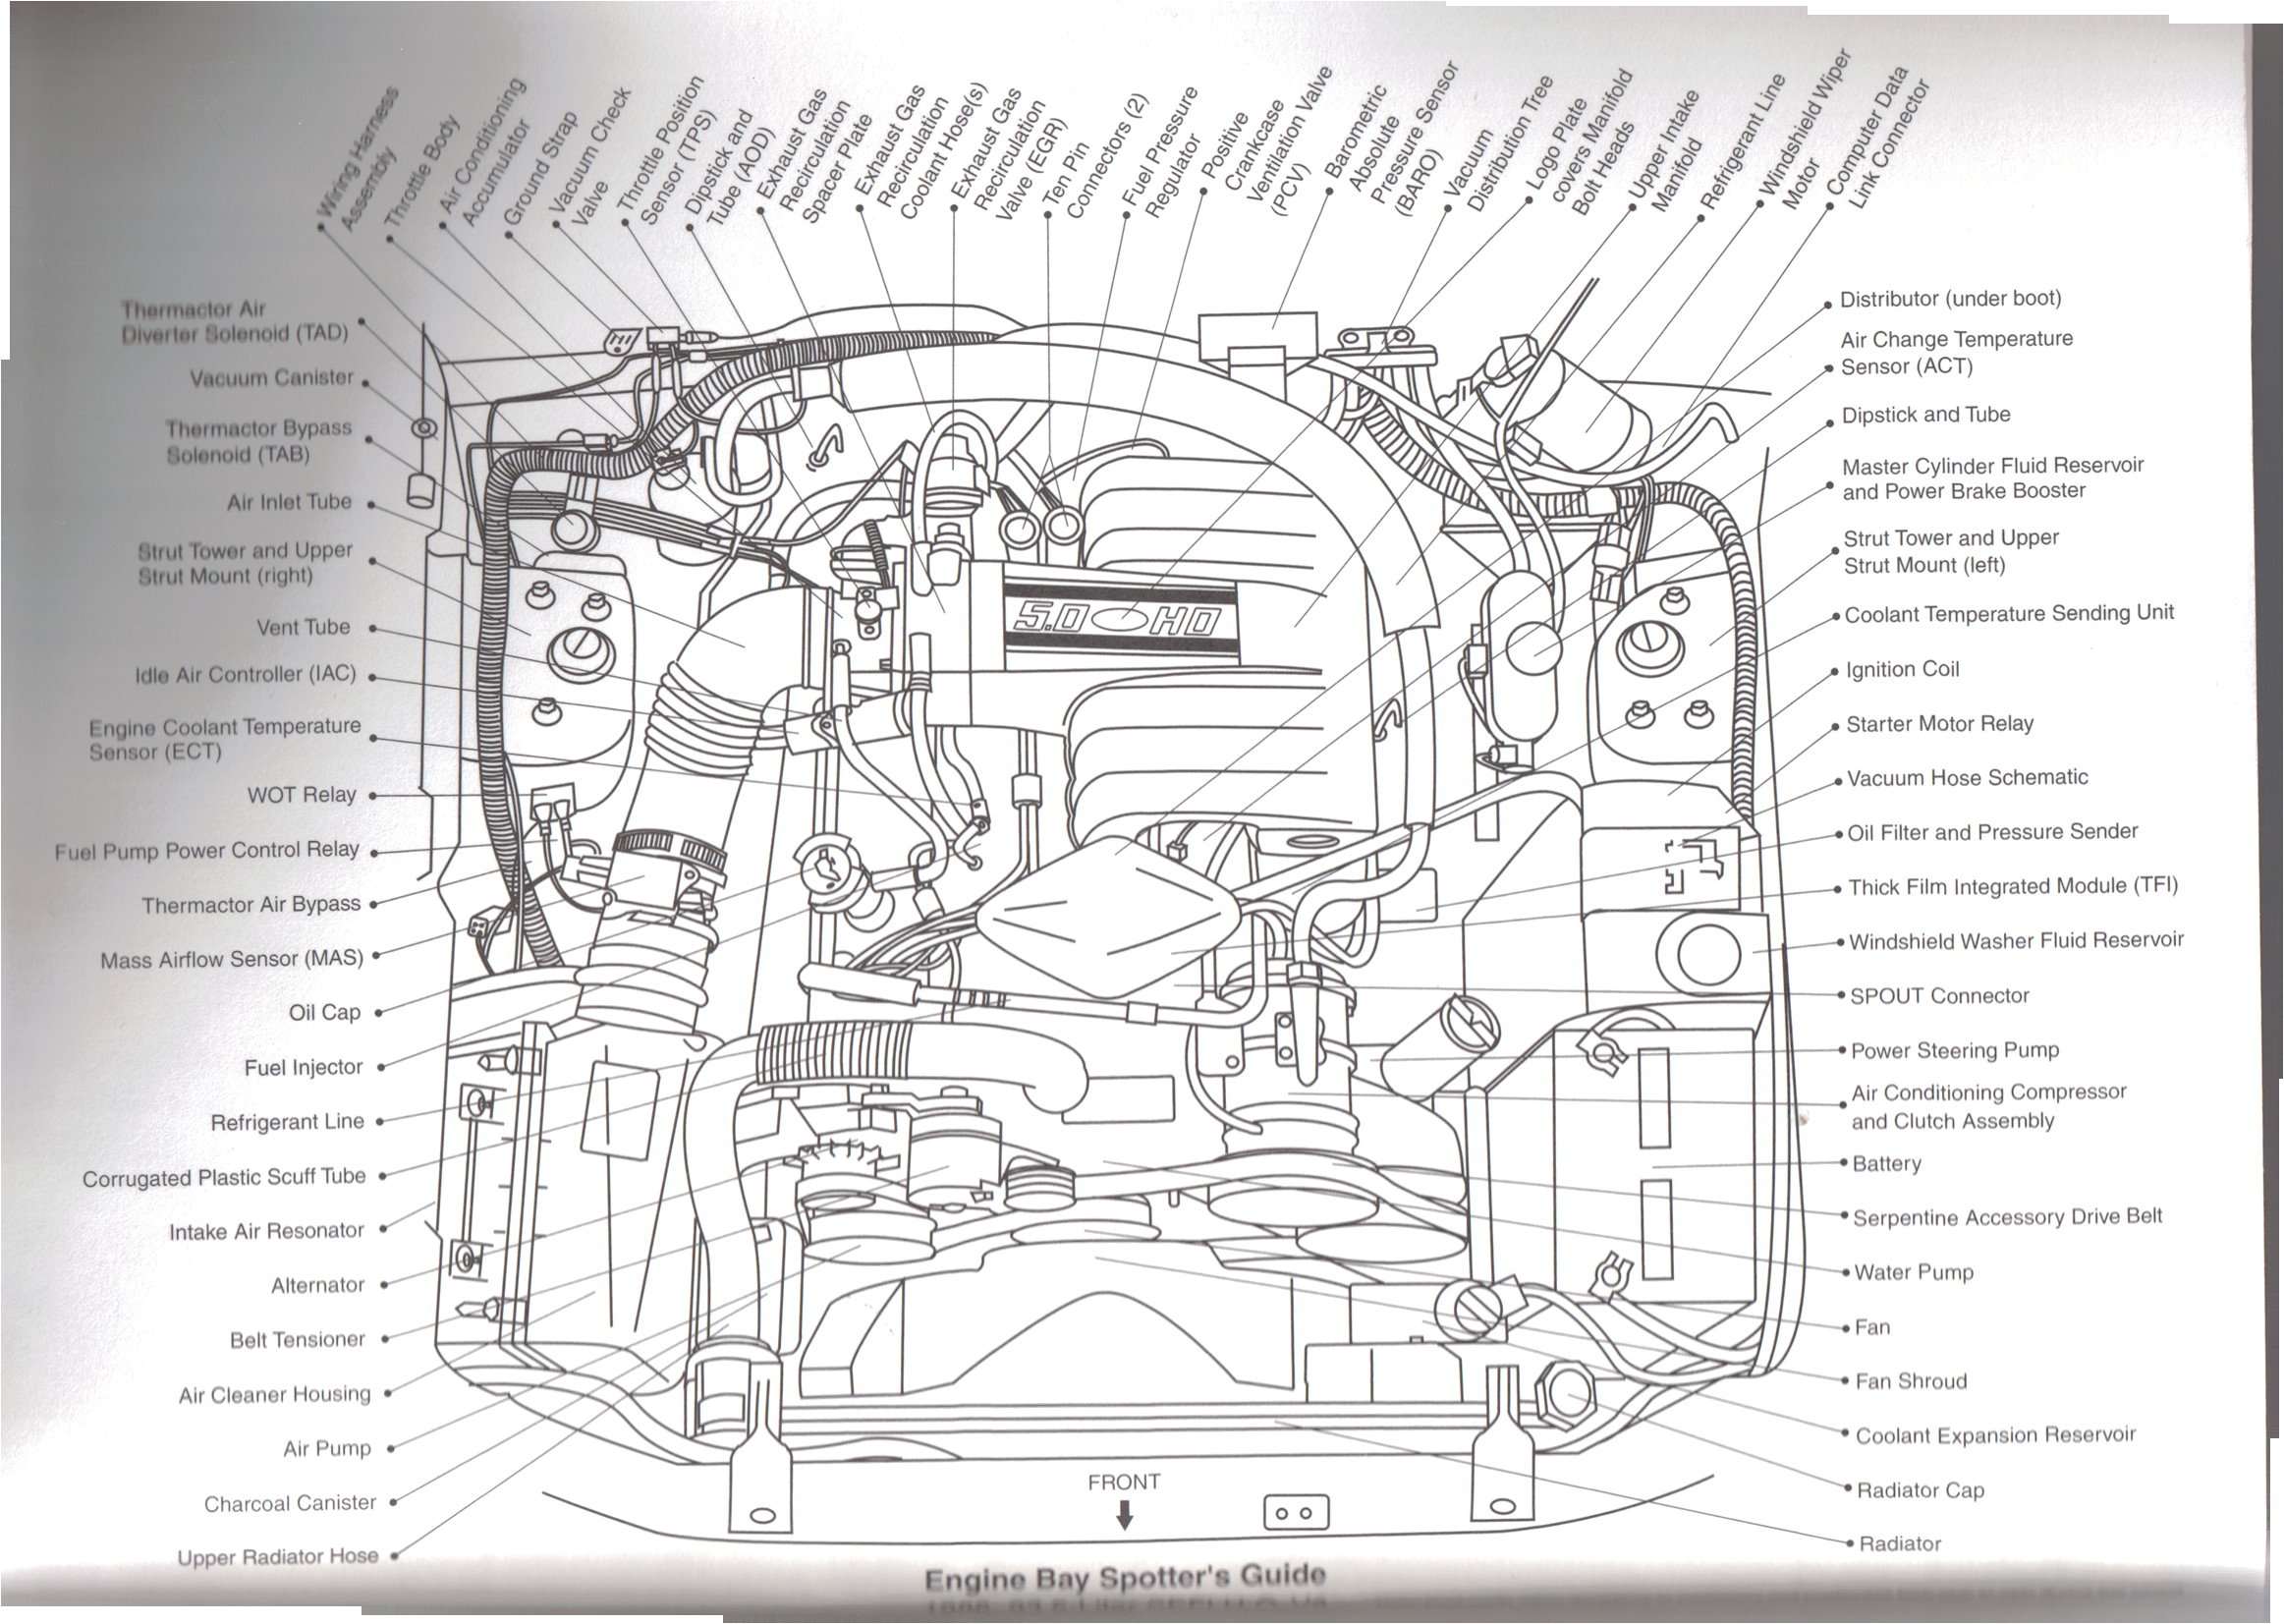 2005 mustang engine diagram 92 mustang engine diagram another blog about wiring diagram e280a2 of 2005 mustang engine diagram png